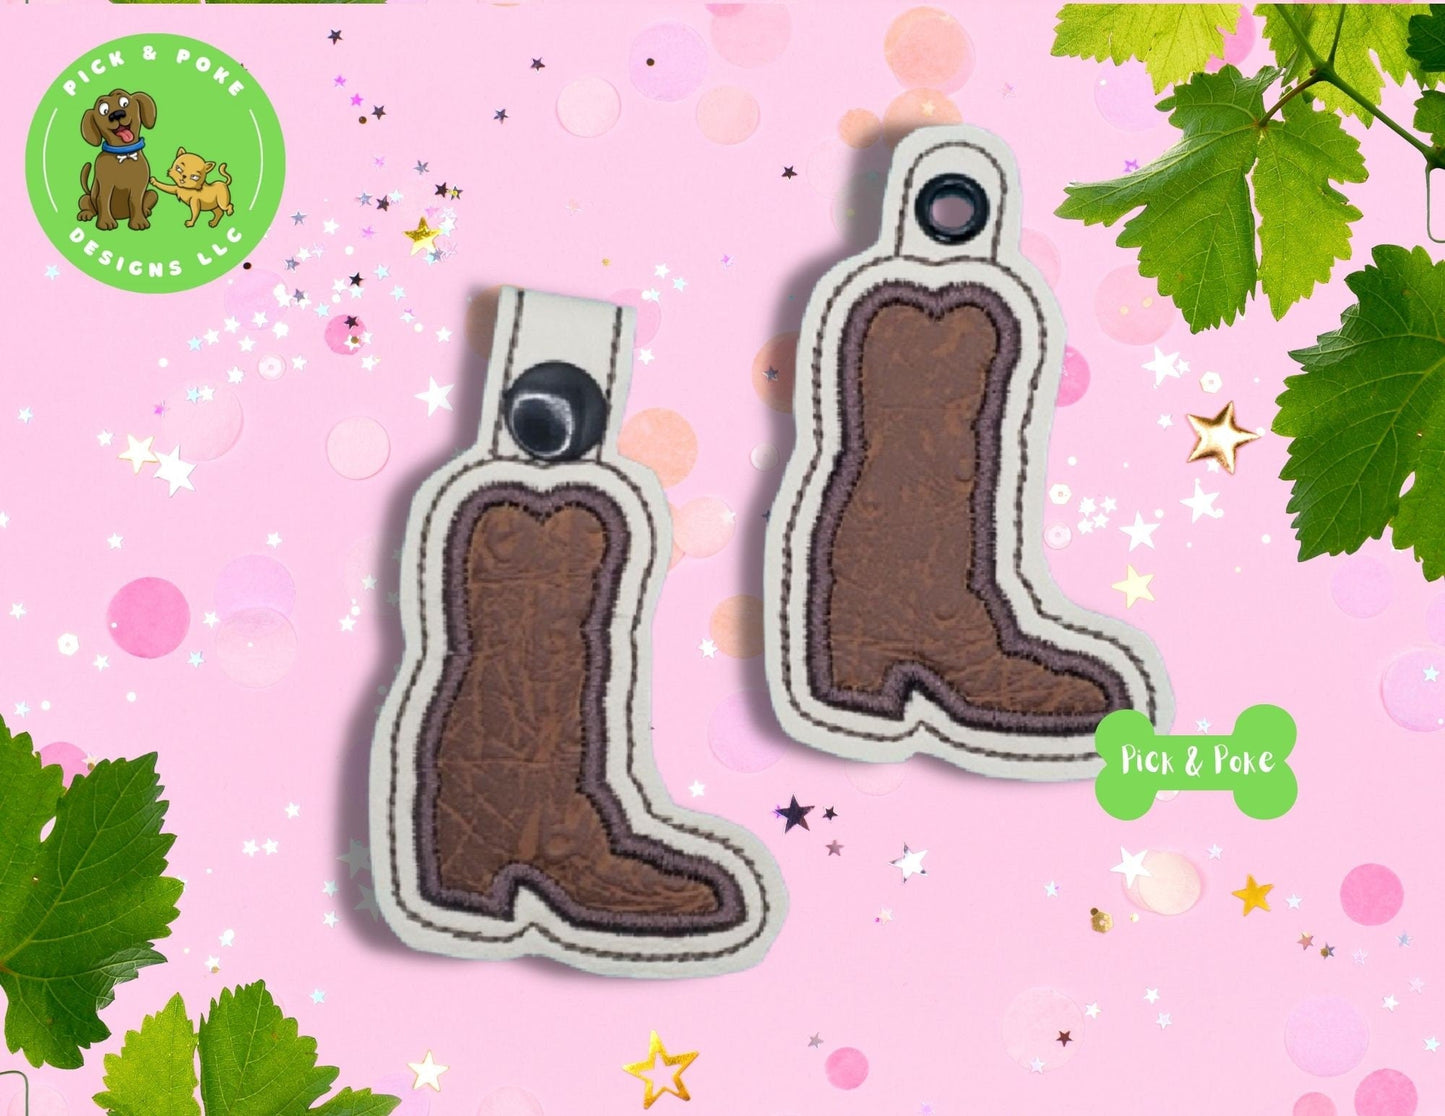 In the Hoop Embroidery Project Applique Cowboy Boot  Snap Tab and Eyelet Key Fob / Gift Tag / Digital File / Instant DOWNLOAD / ITHPick and Poke Designs